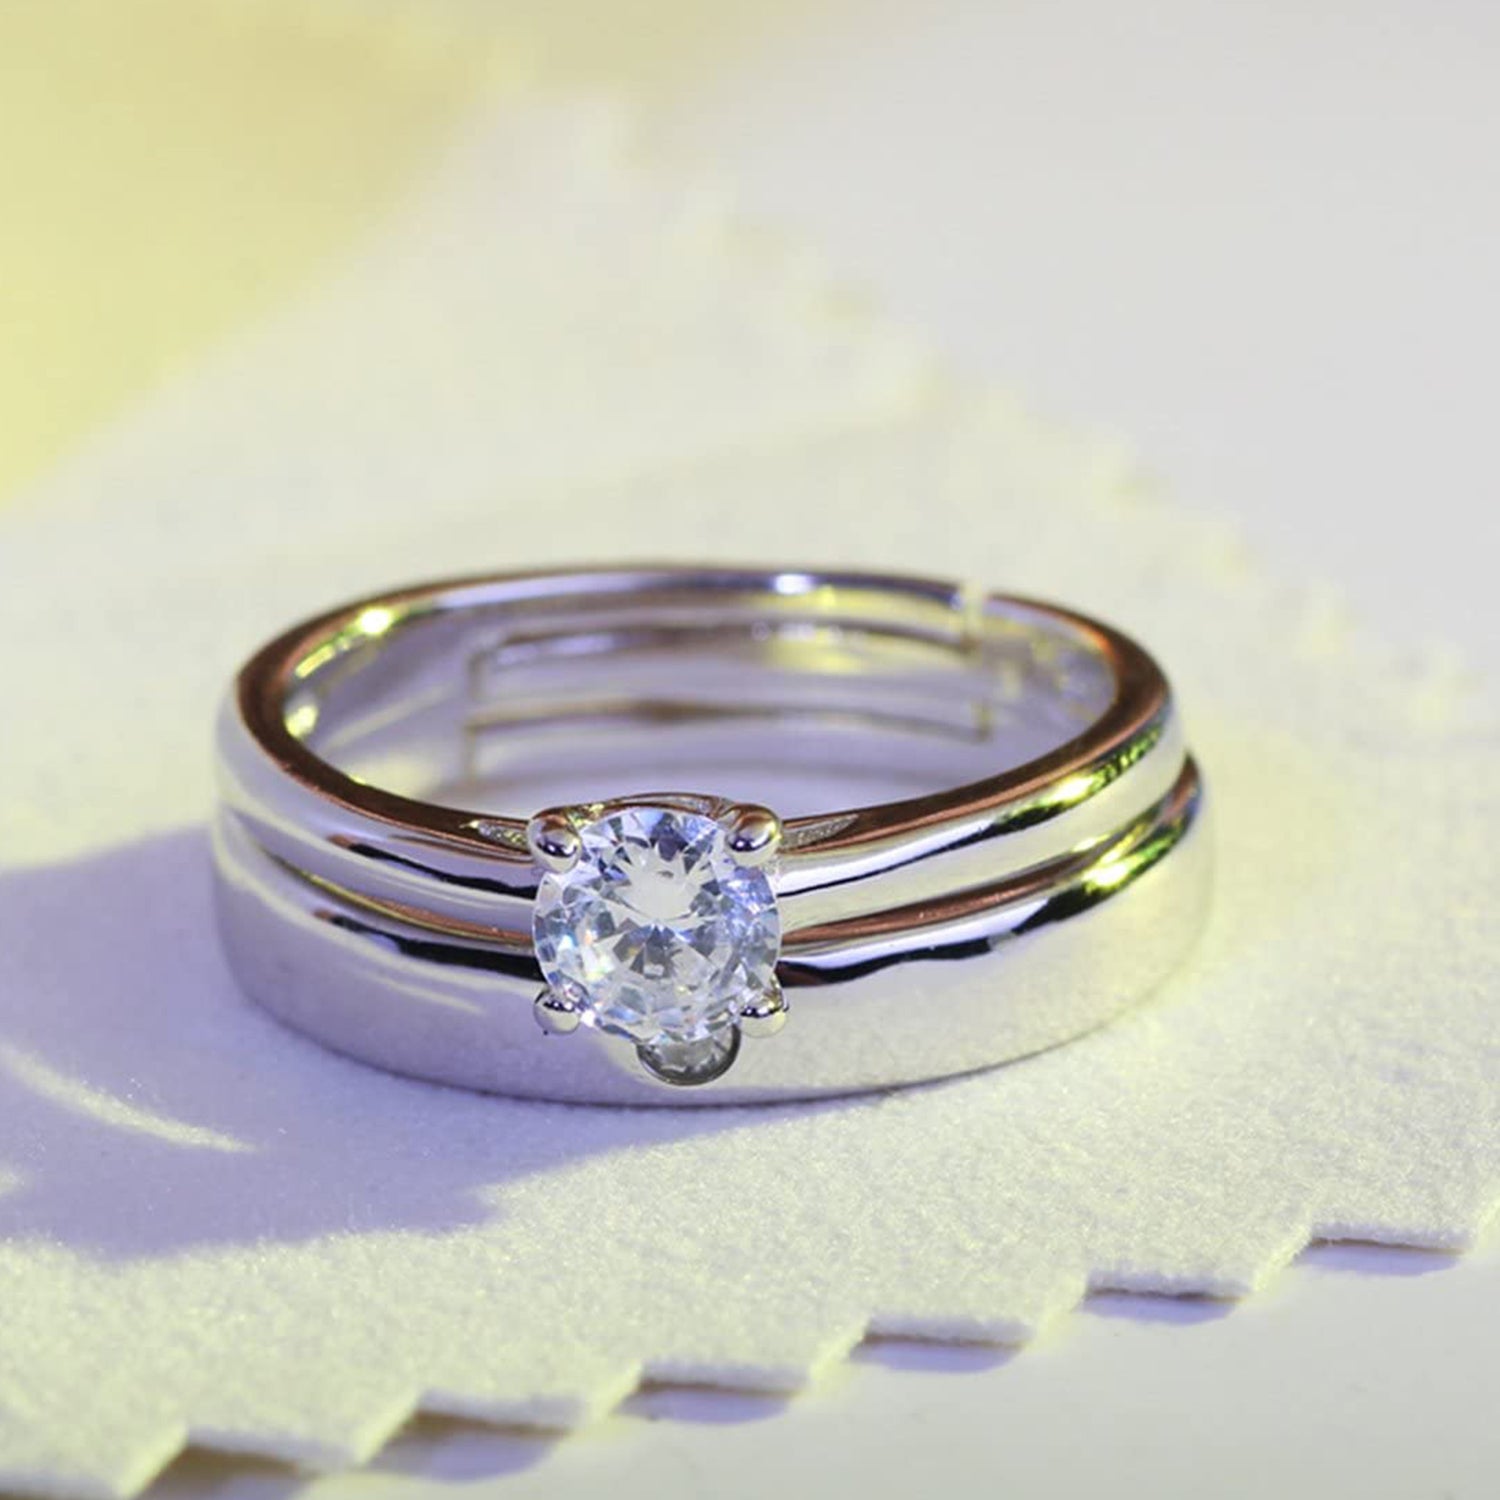 Solitaire Couple Ring Set with Cubic Zirconia and Crystal